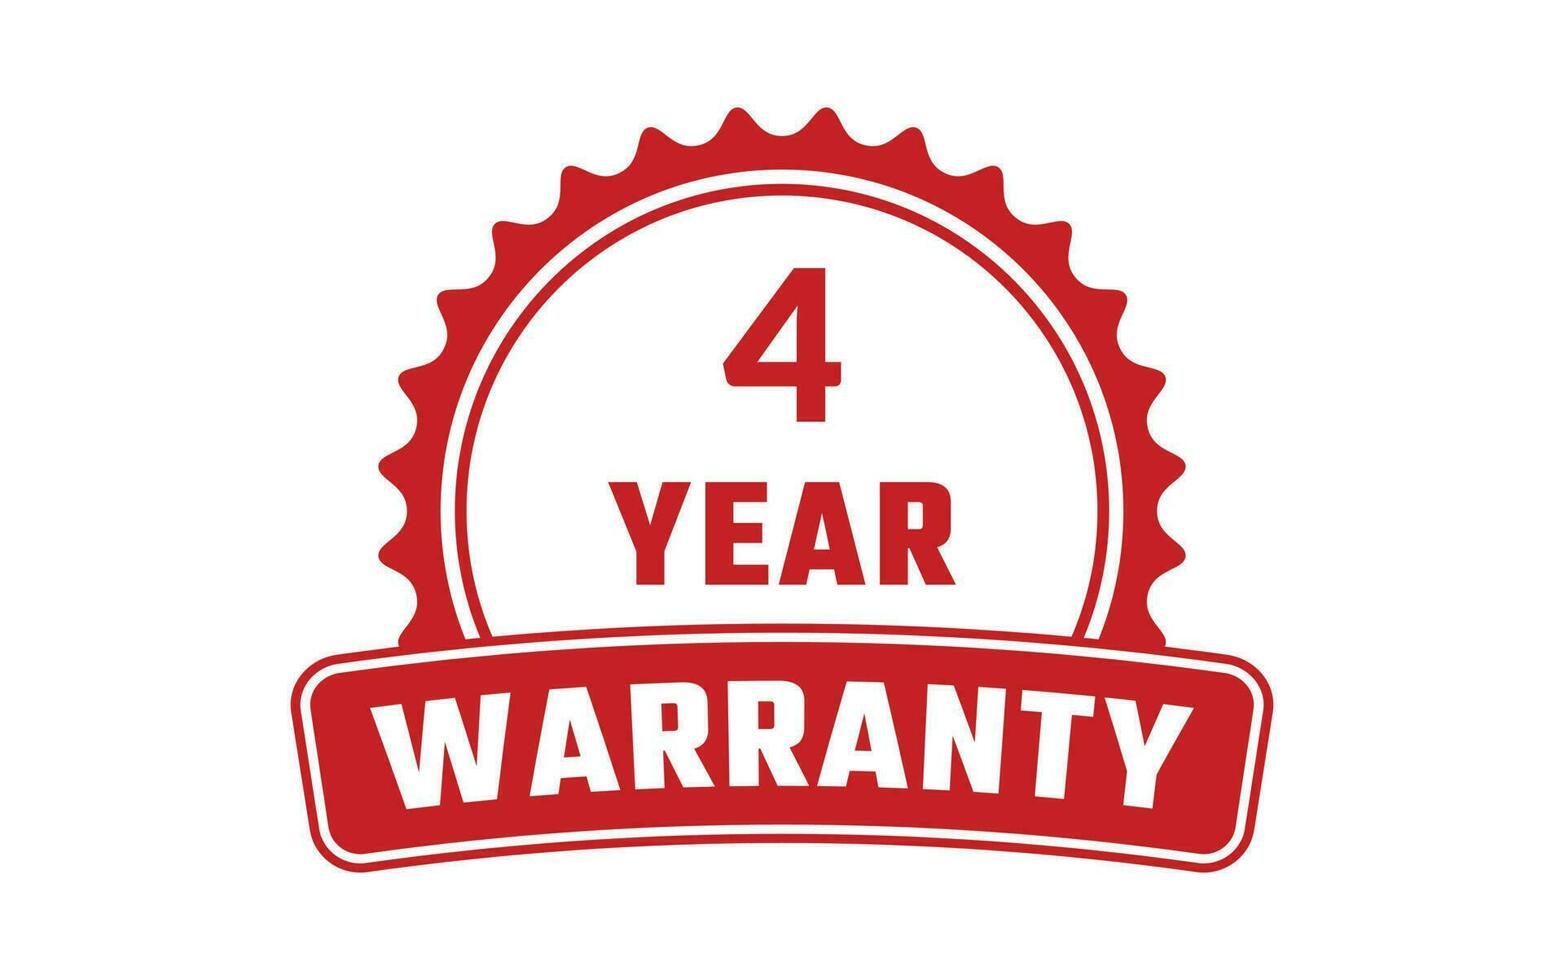 4 Year Warranty Rubber Stamp vector